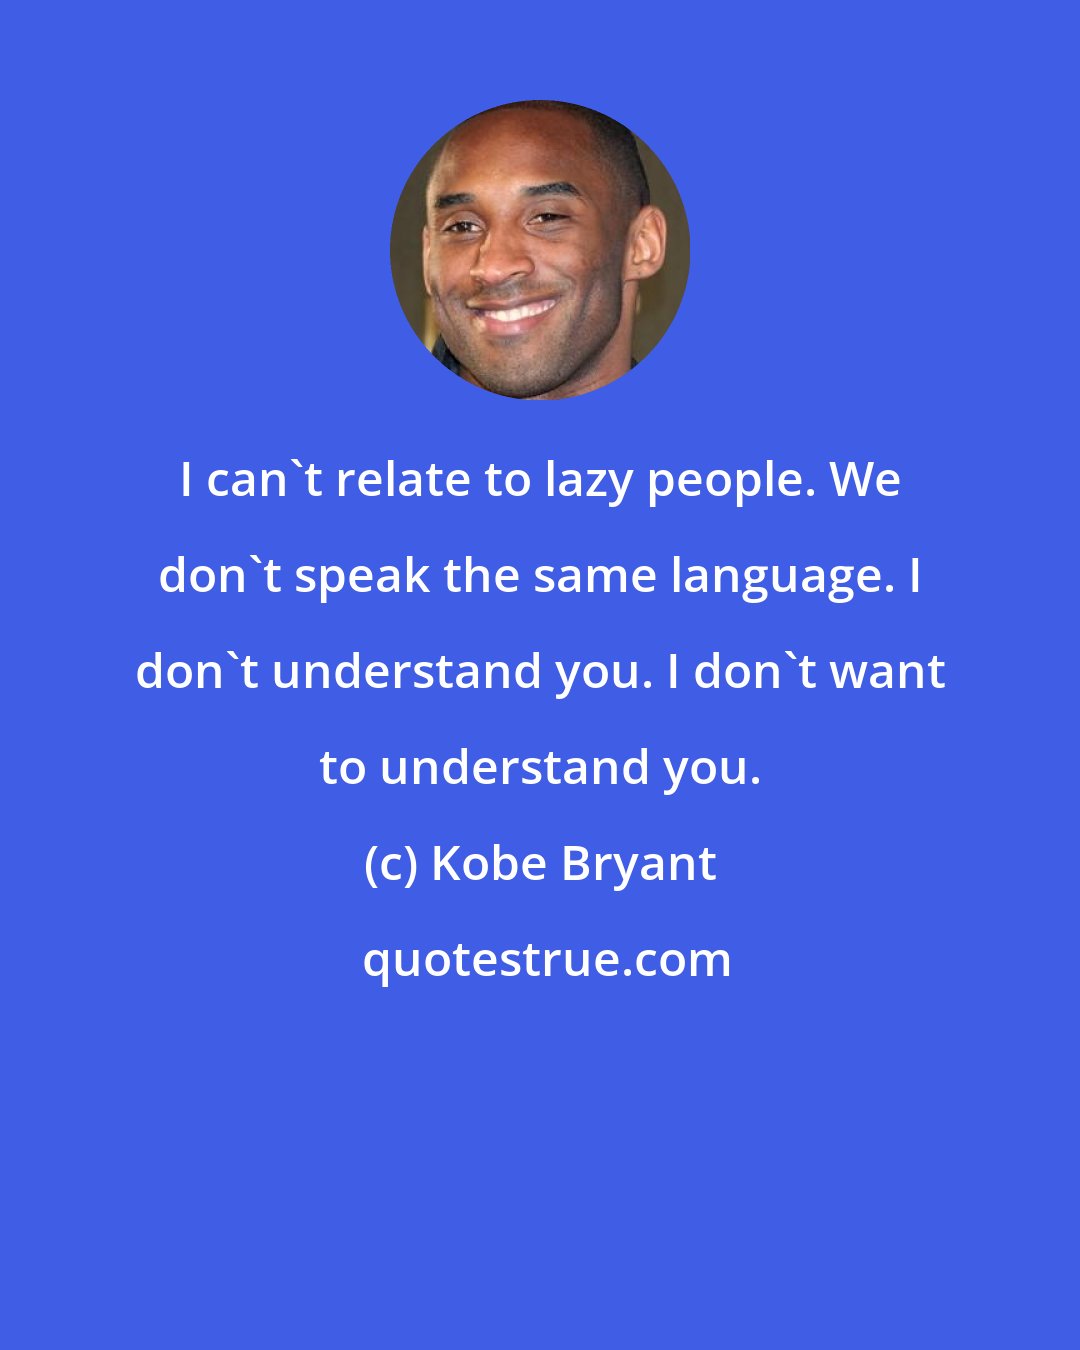 Kobe Bryant: I can't relate to lazy people. We don't speak the same language. I don't understand you. I don't want to understand you.